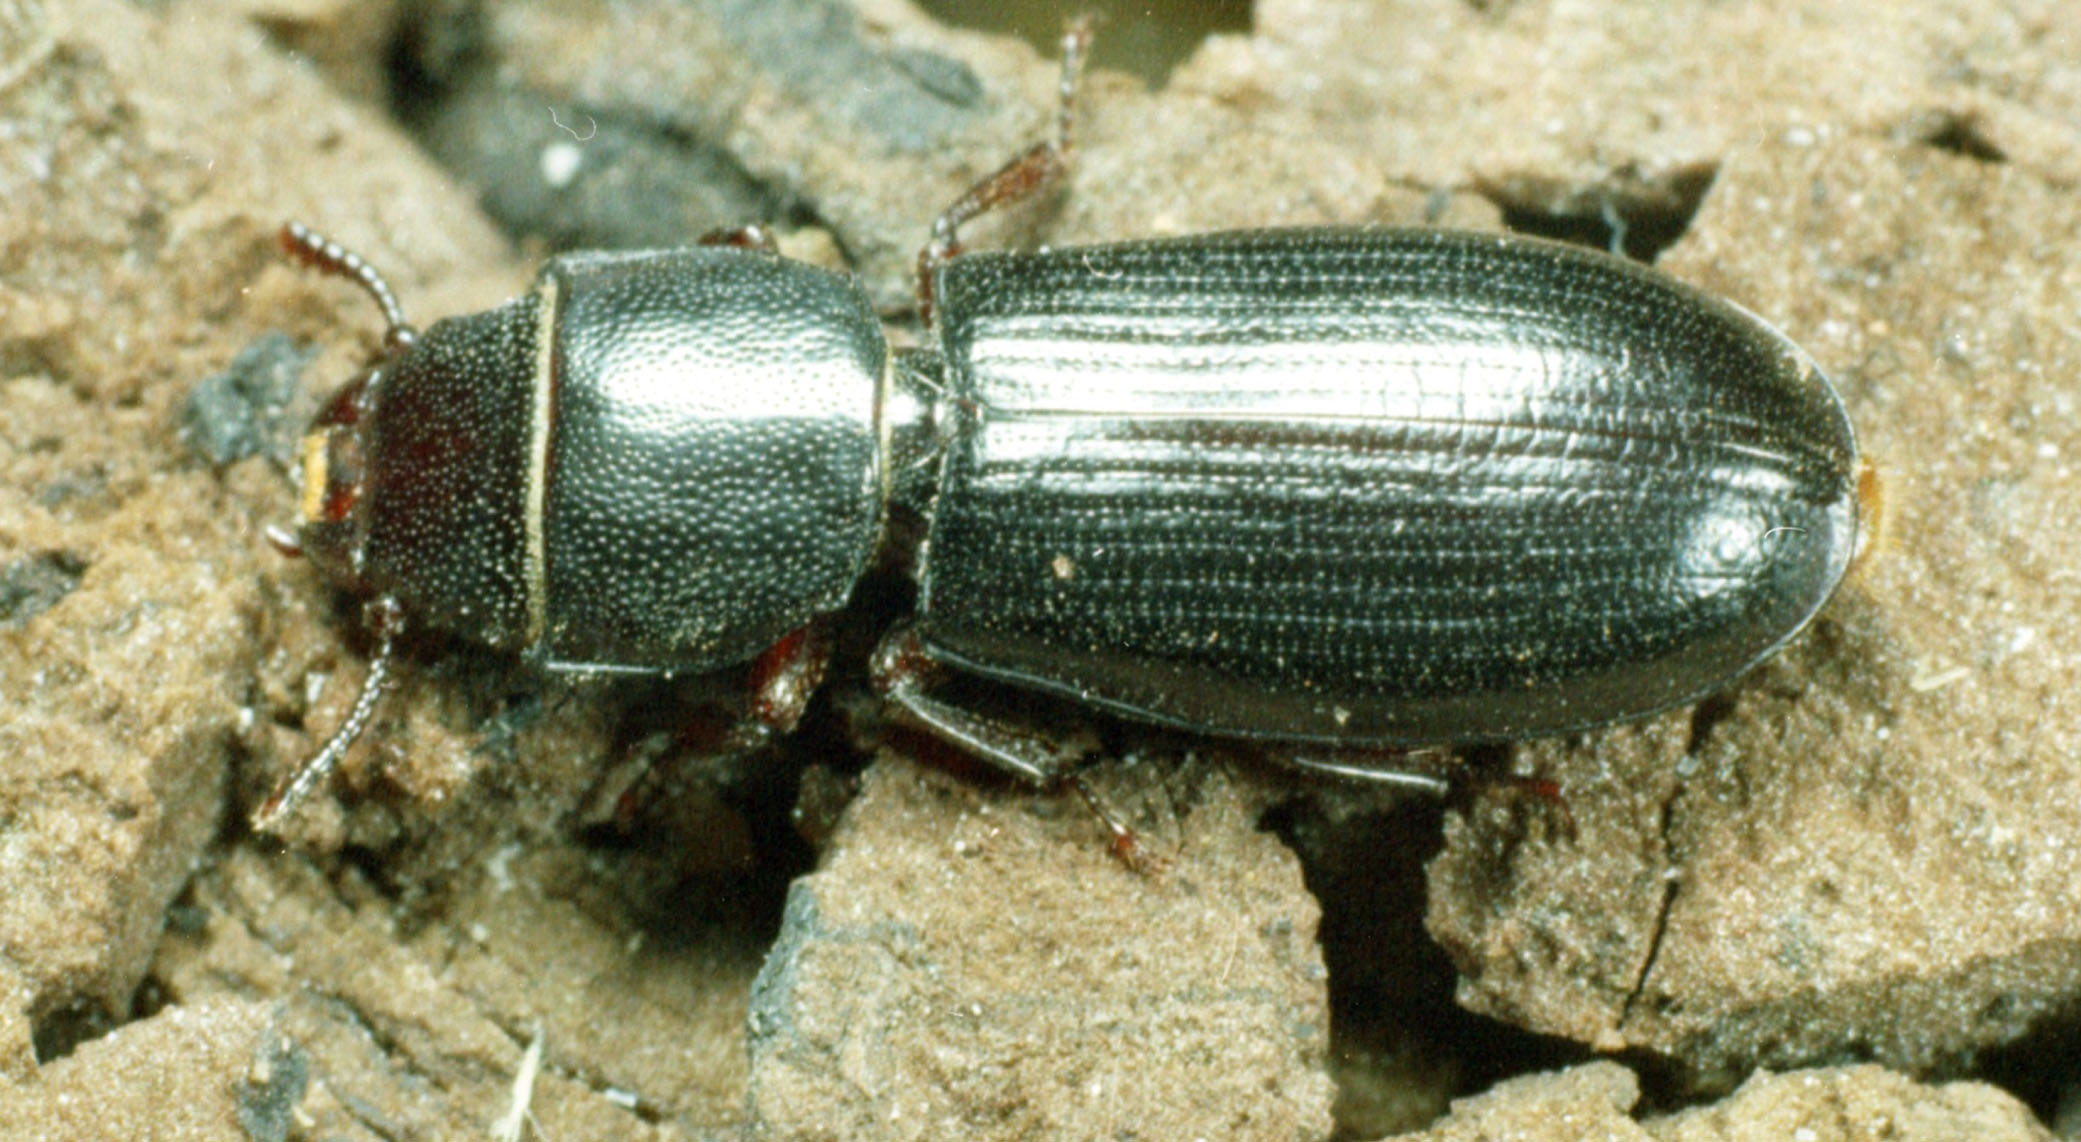 Medium sized black beetle that has noticeable constriction between thorax and abdomen.